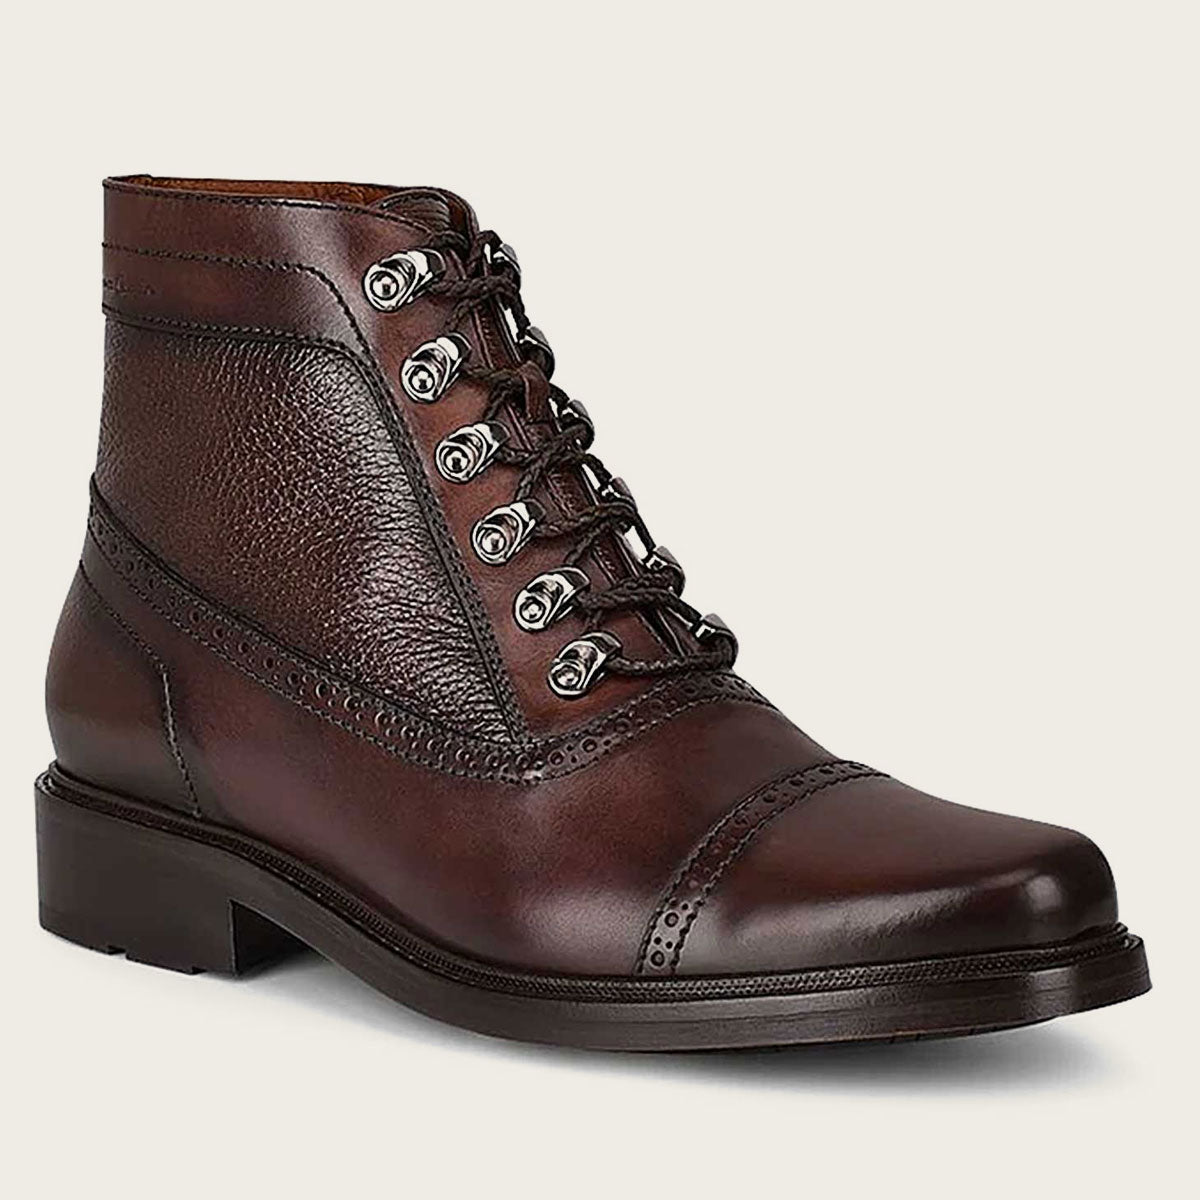 Hand-painted dark brown leather casual bootie - a stylish and unique addition to your footwear collection